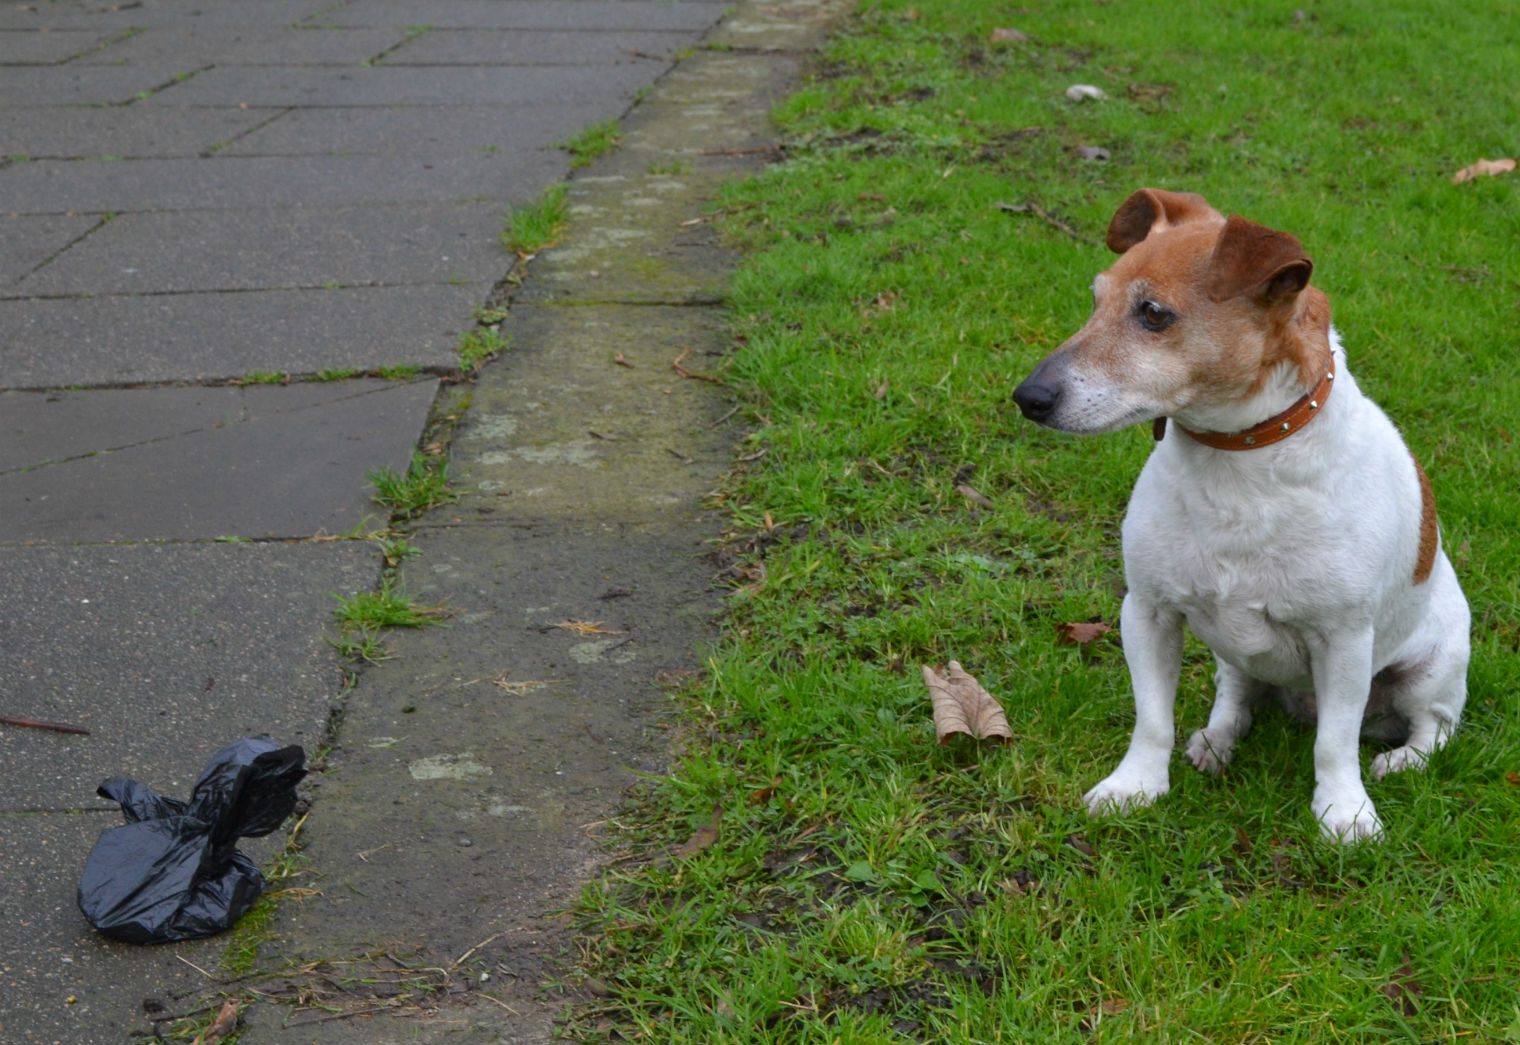 Pepper looks down at an un-picked up poo in the park. Photo: SE